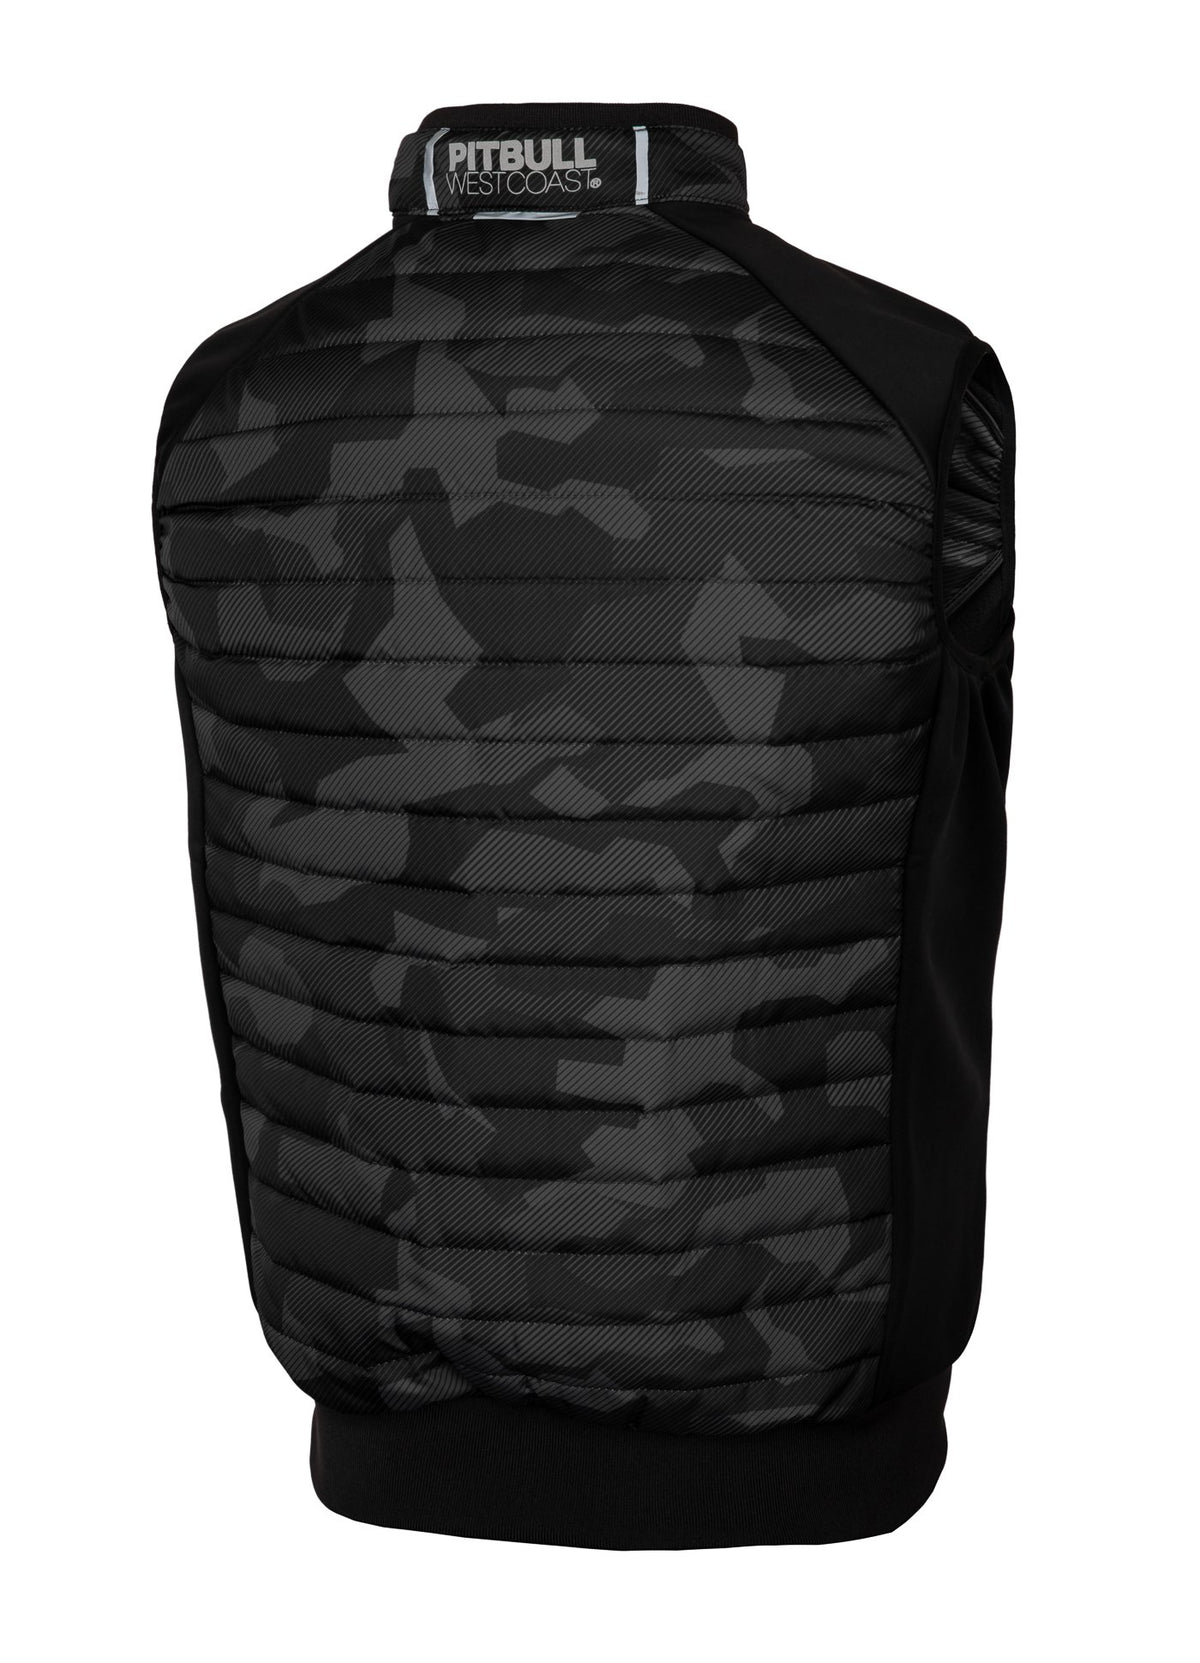 PACIFIC Black Camo Quilted Vest.